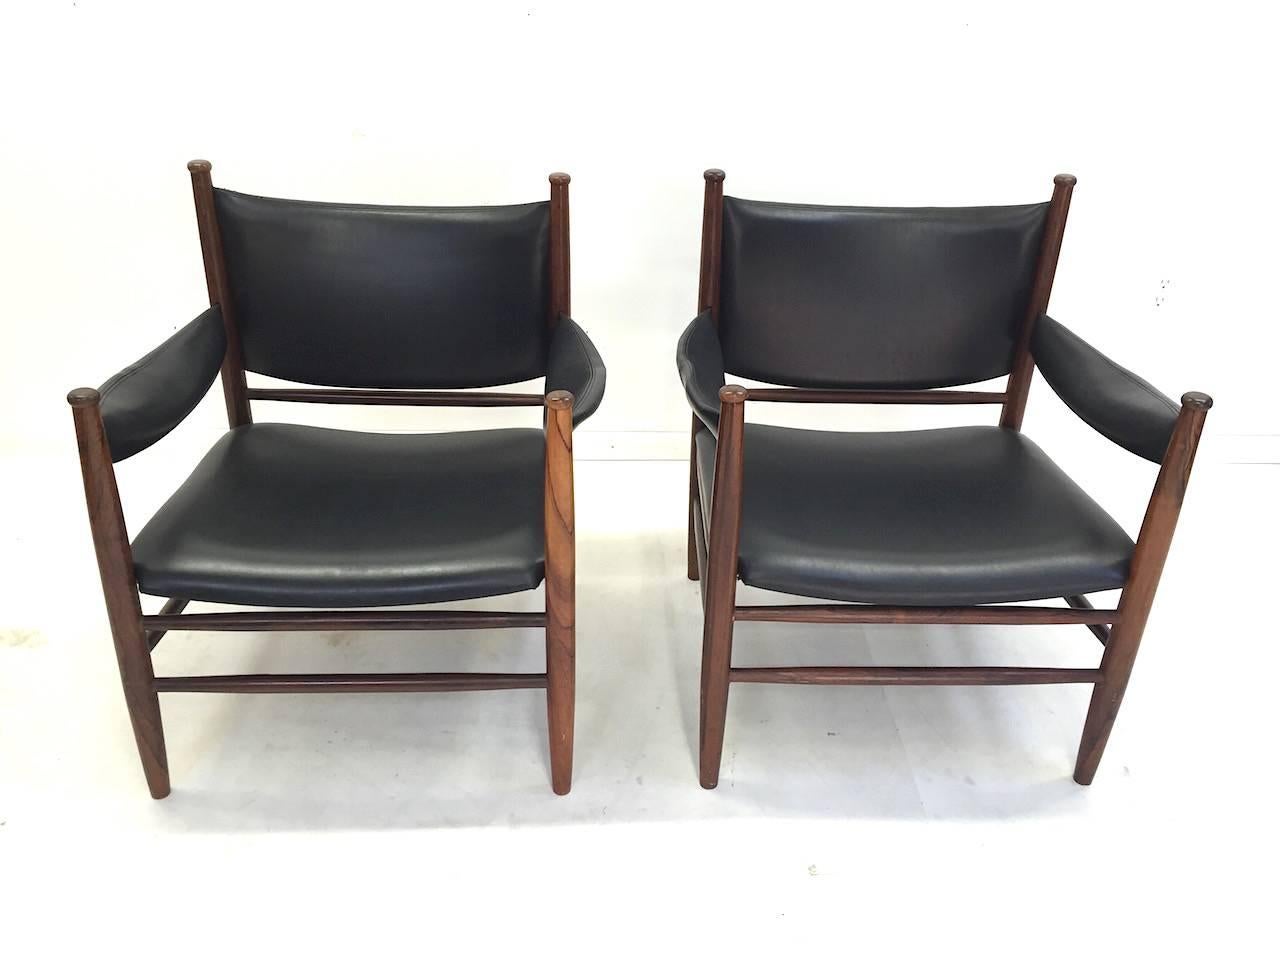 Exceptional Pair of Rosewood Safari Lounge Chairs 1